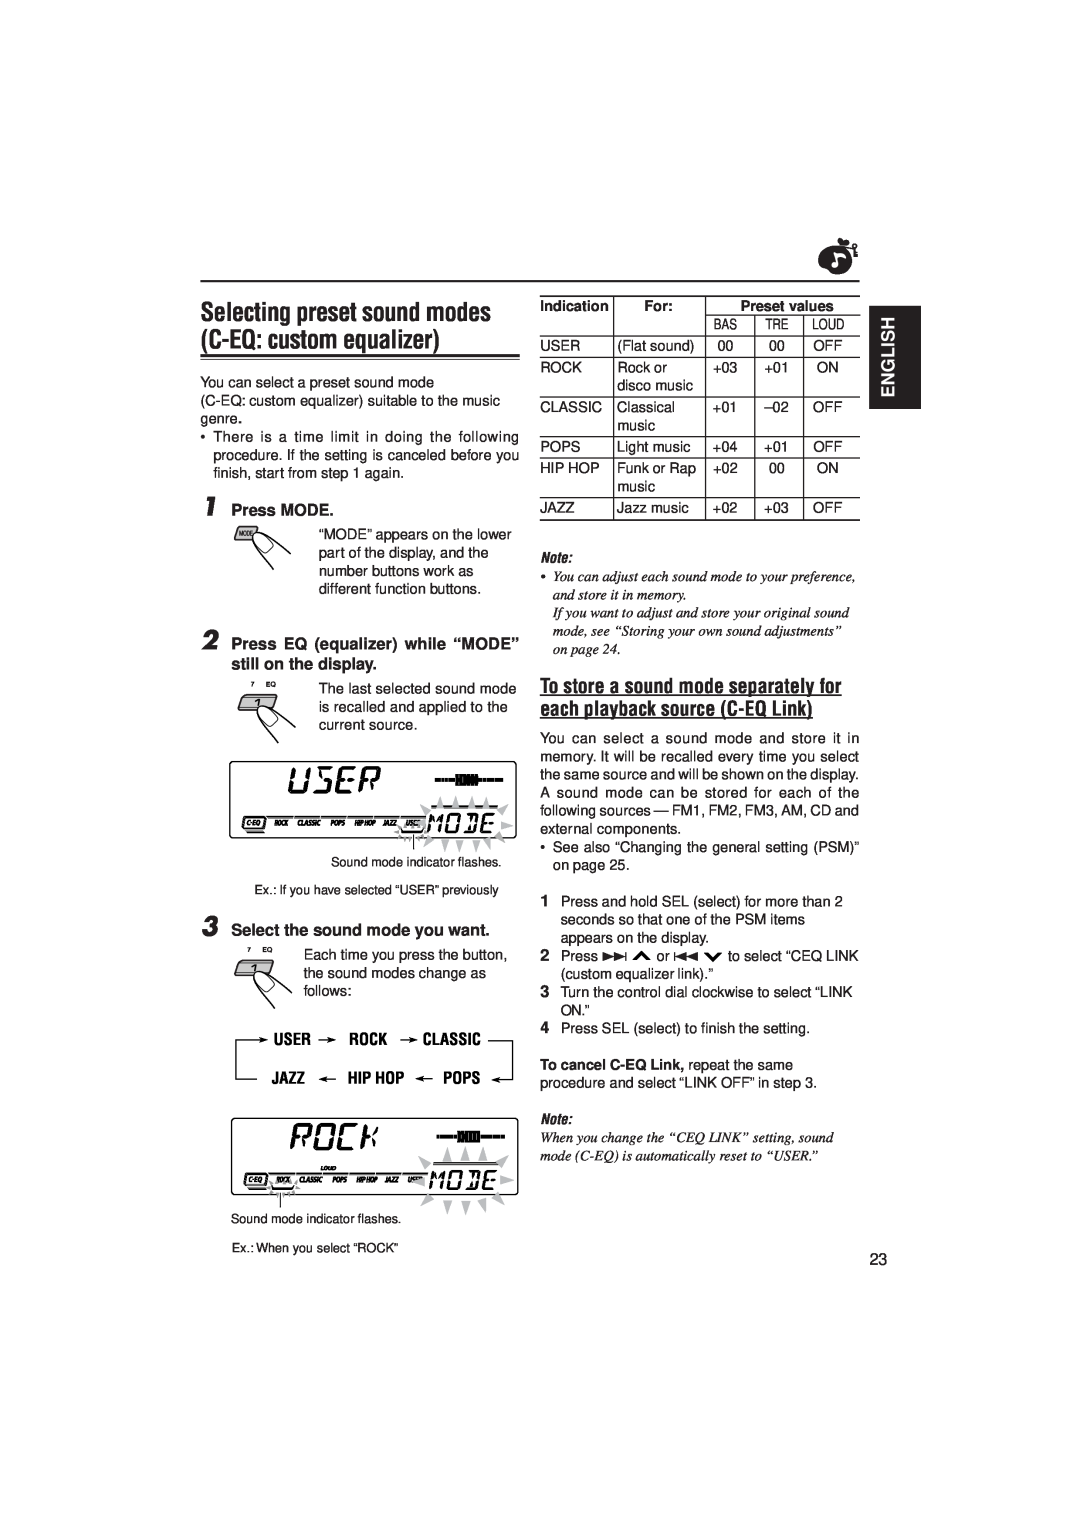 JVC KD-SX992R manual English, Press MODE, Select the sound mode you want, User Rock Classic Jazz Hip Hop Pops, Indication 